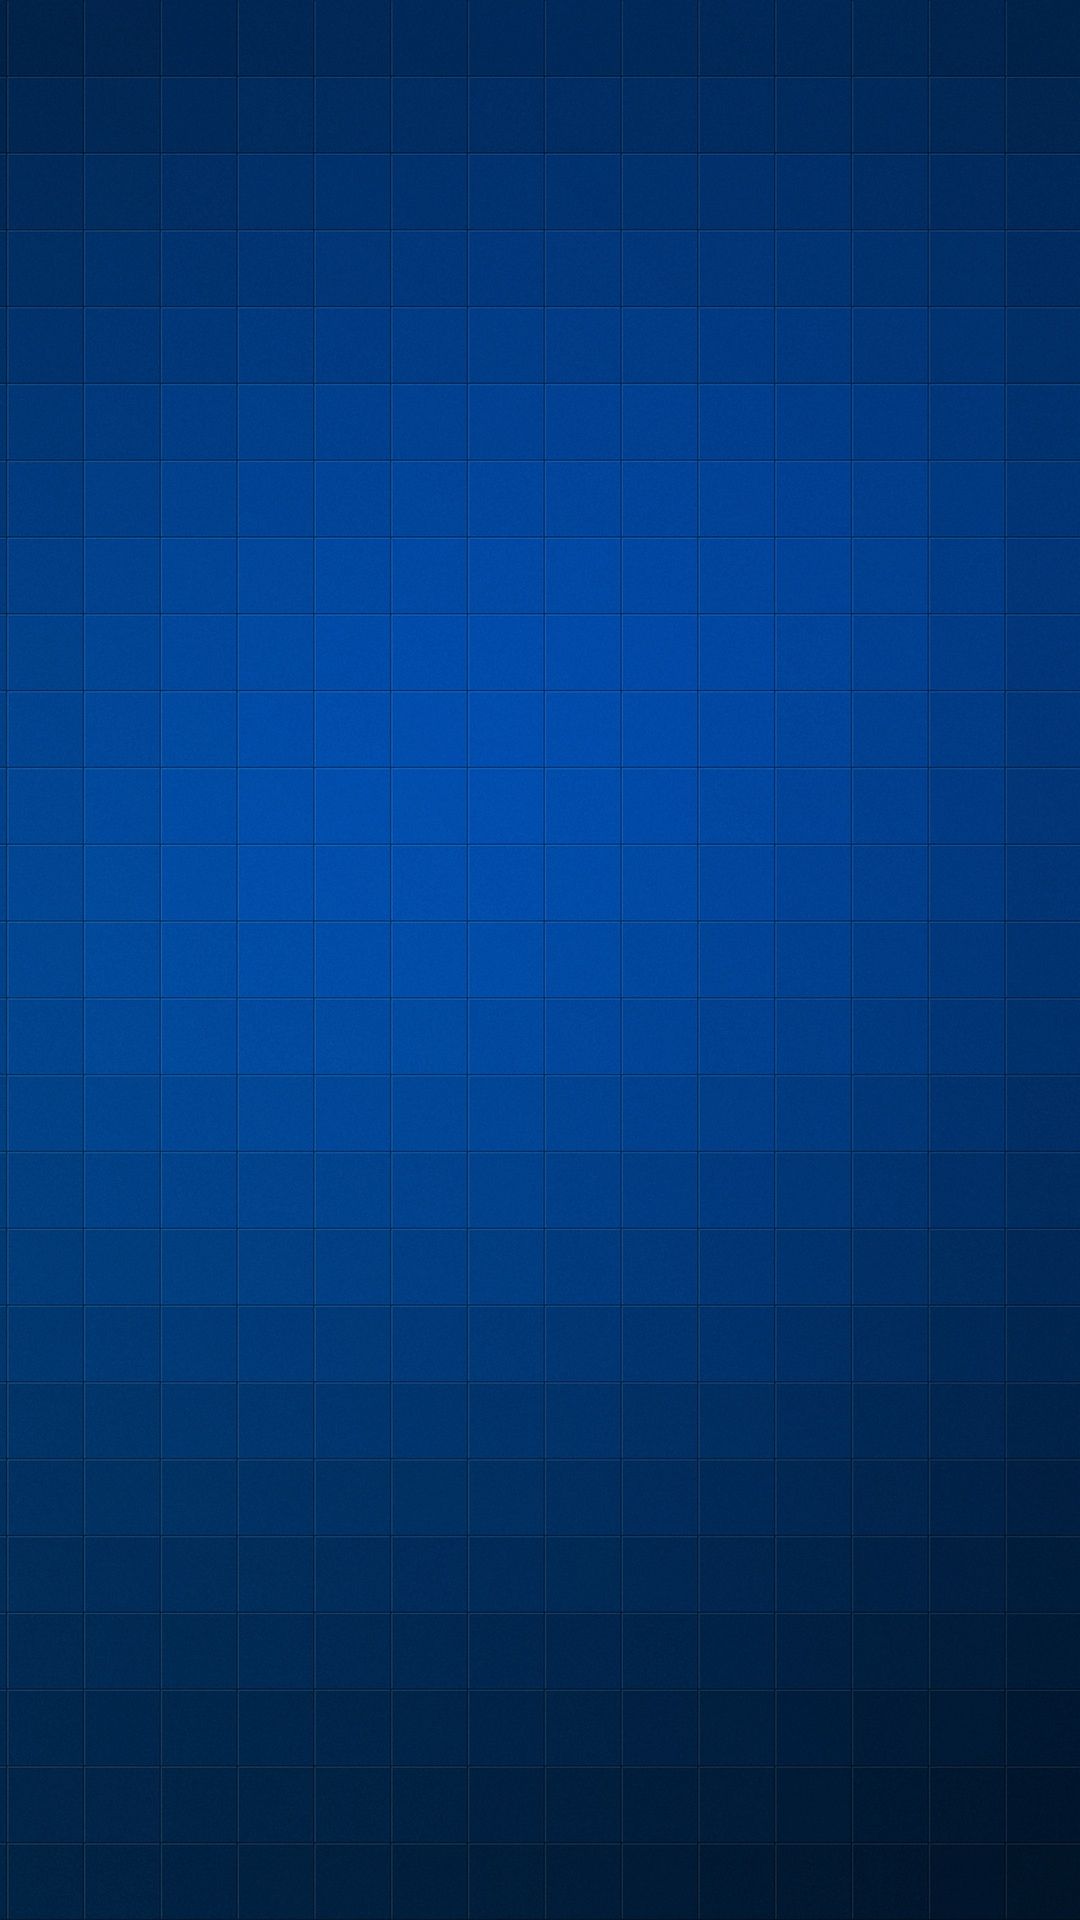 New iPhone Wallpaper. iPhone Wallpaper. iPhone wallpaper solid color, S wallpaper android, Blue wallpaper iphone